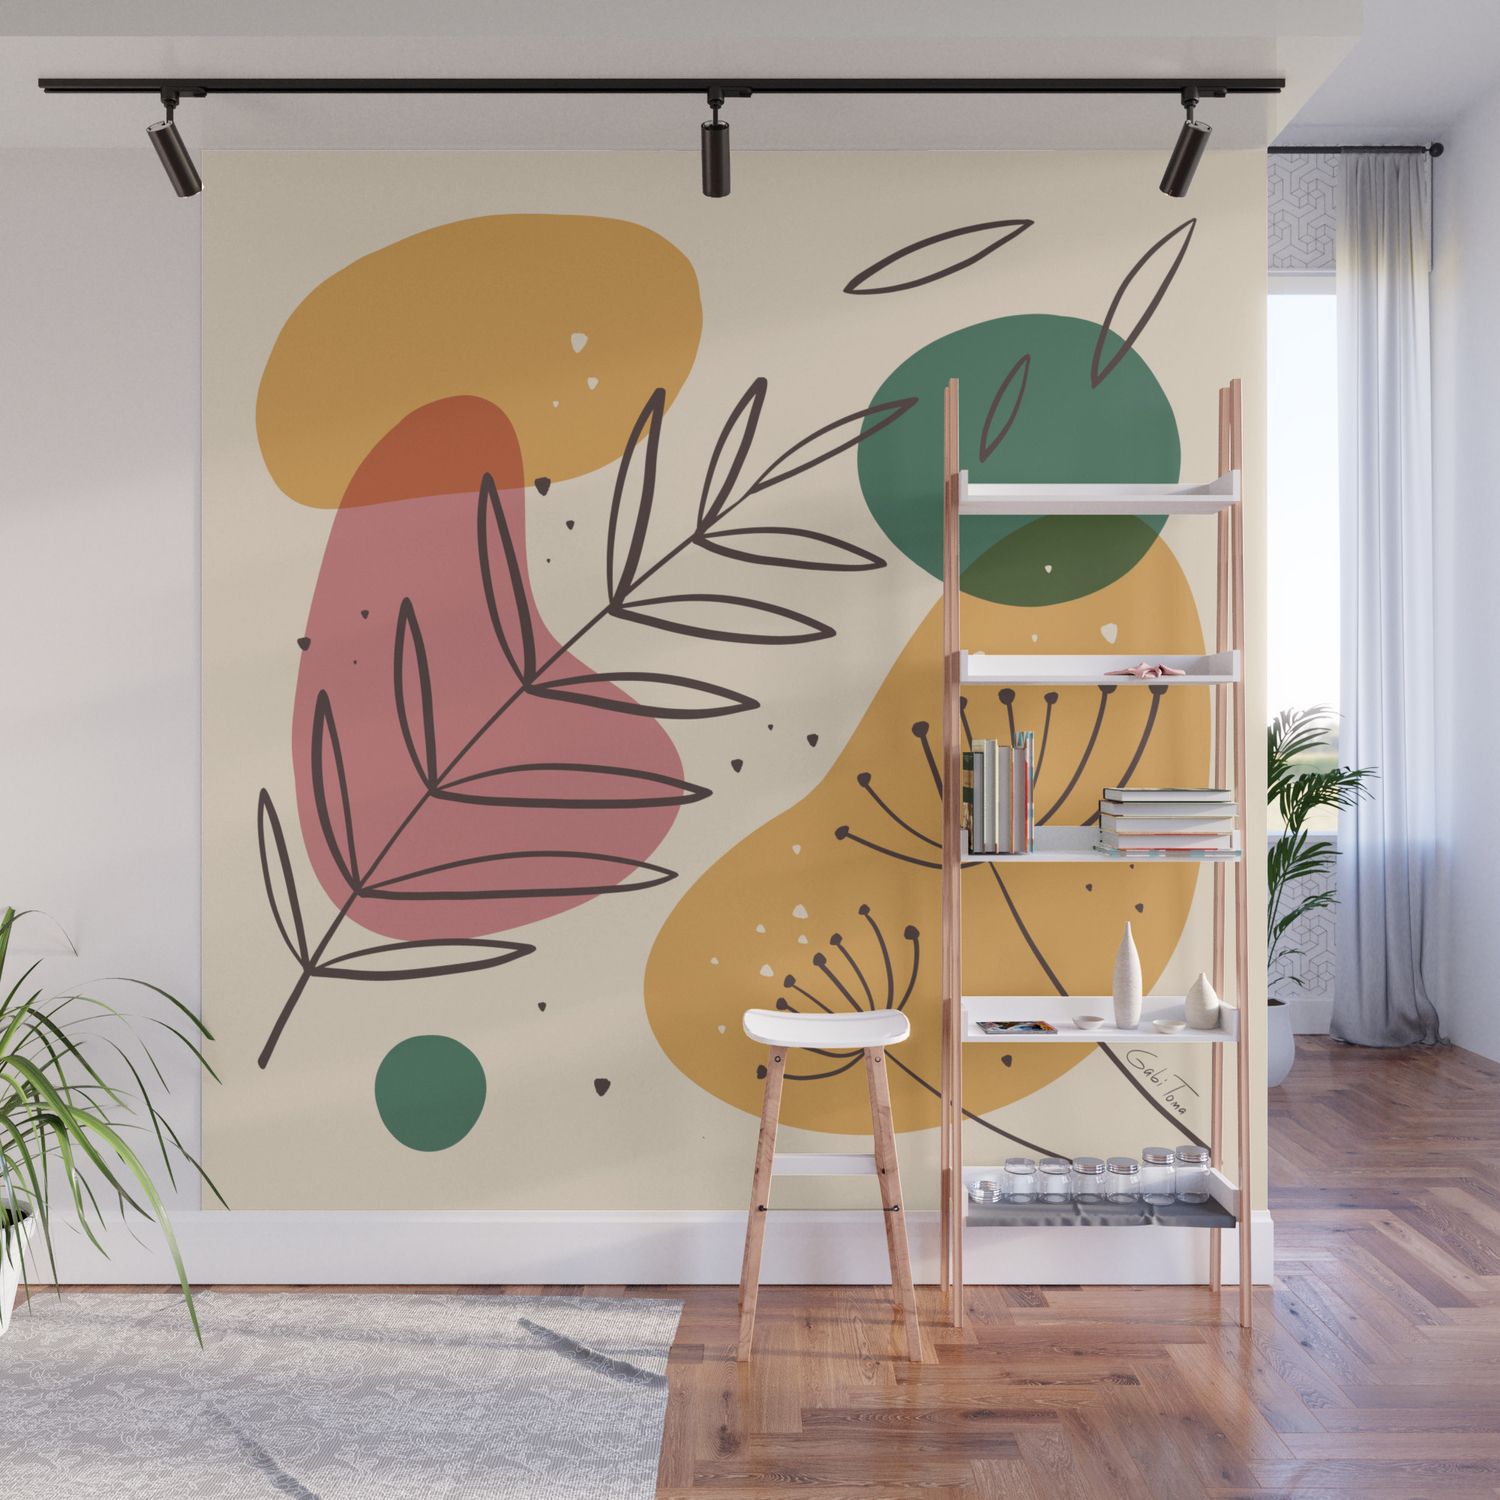 Colorful Abstract Shapes And Plants Design Wall Muralgabi Toma |  Society6 Intended For Abstract Plant Wall Art (View 8 of 15)